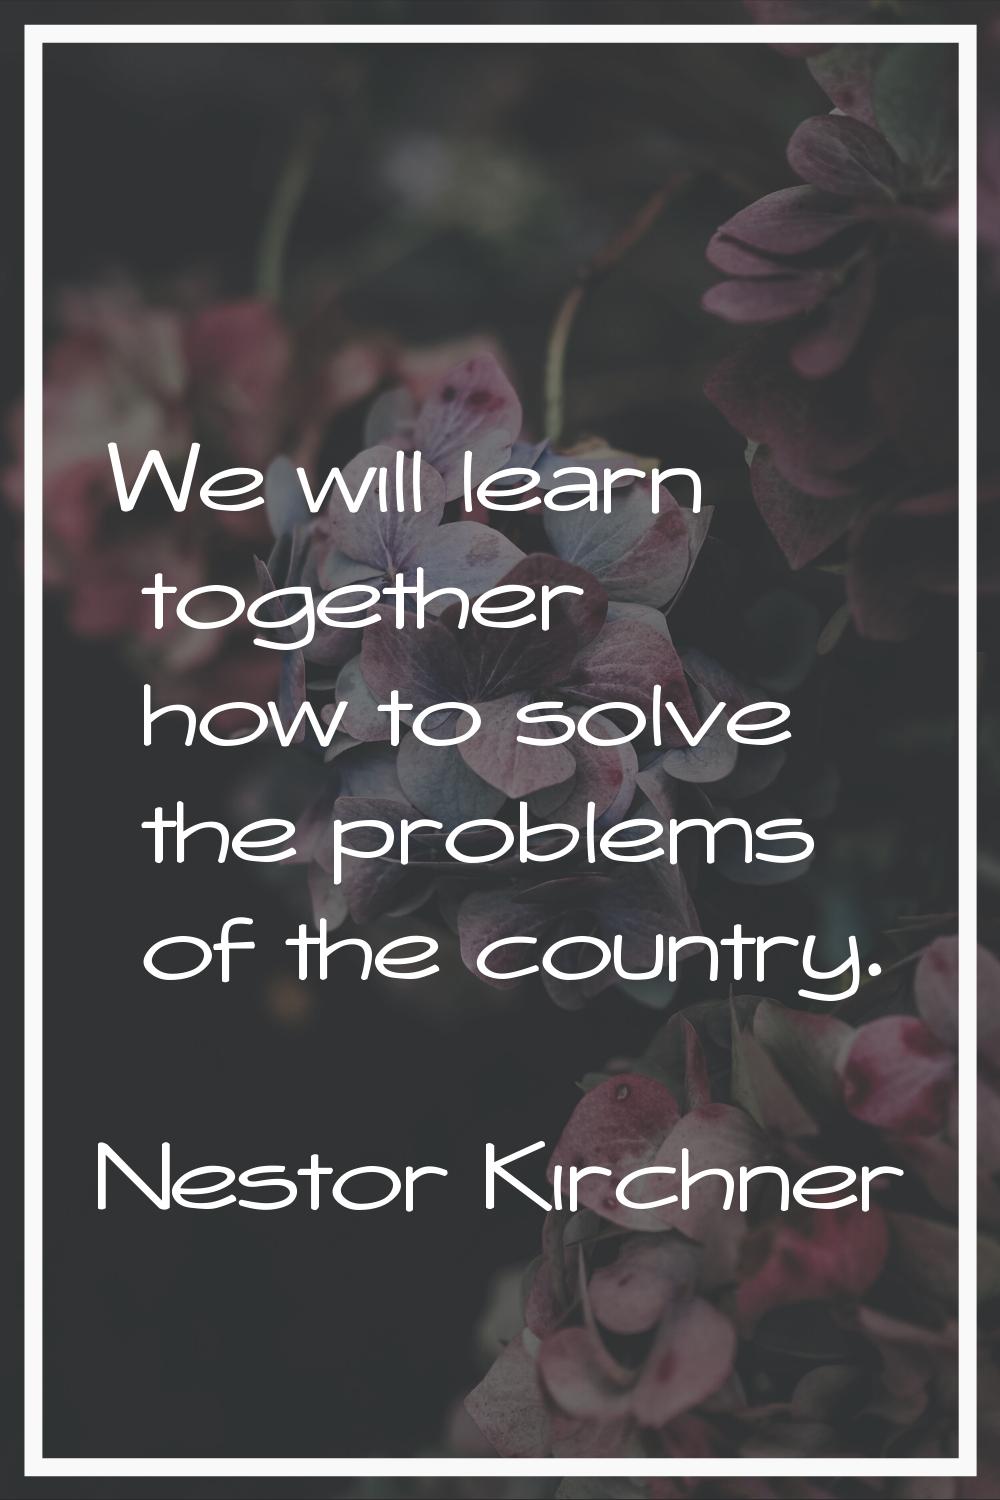 We will learn together how to solve the problems of the country.